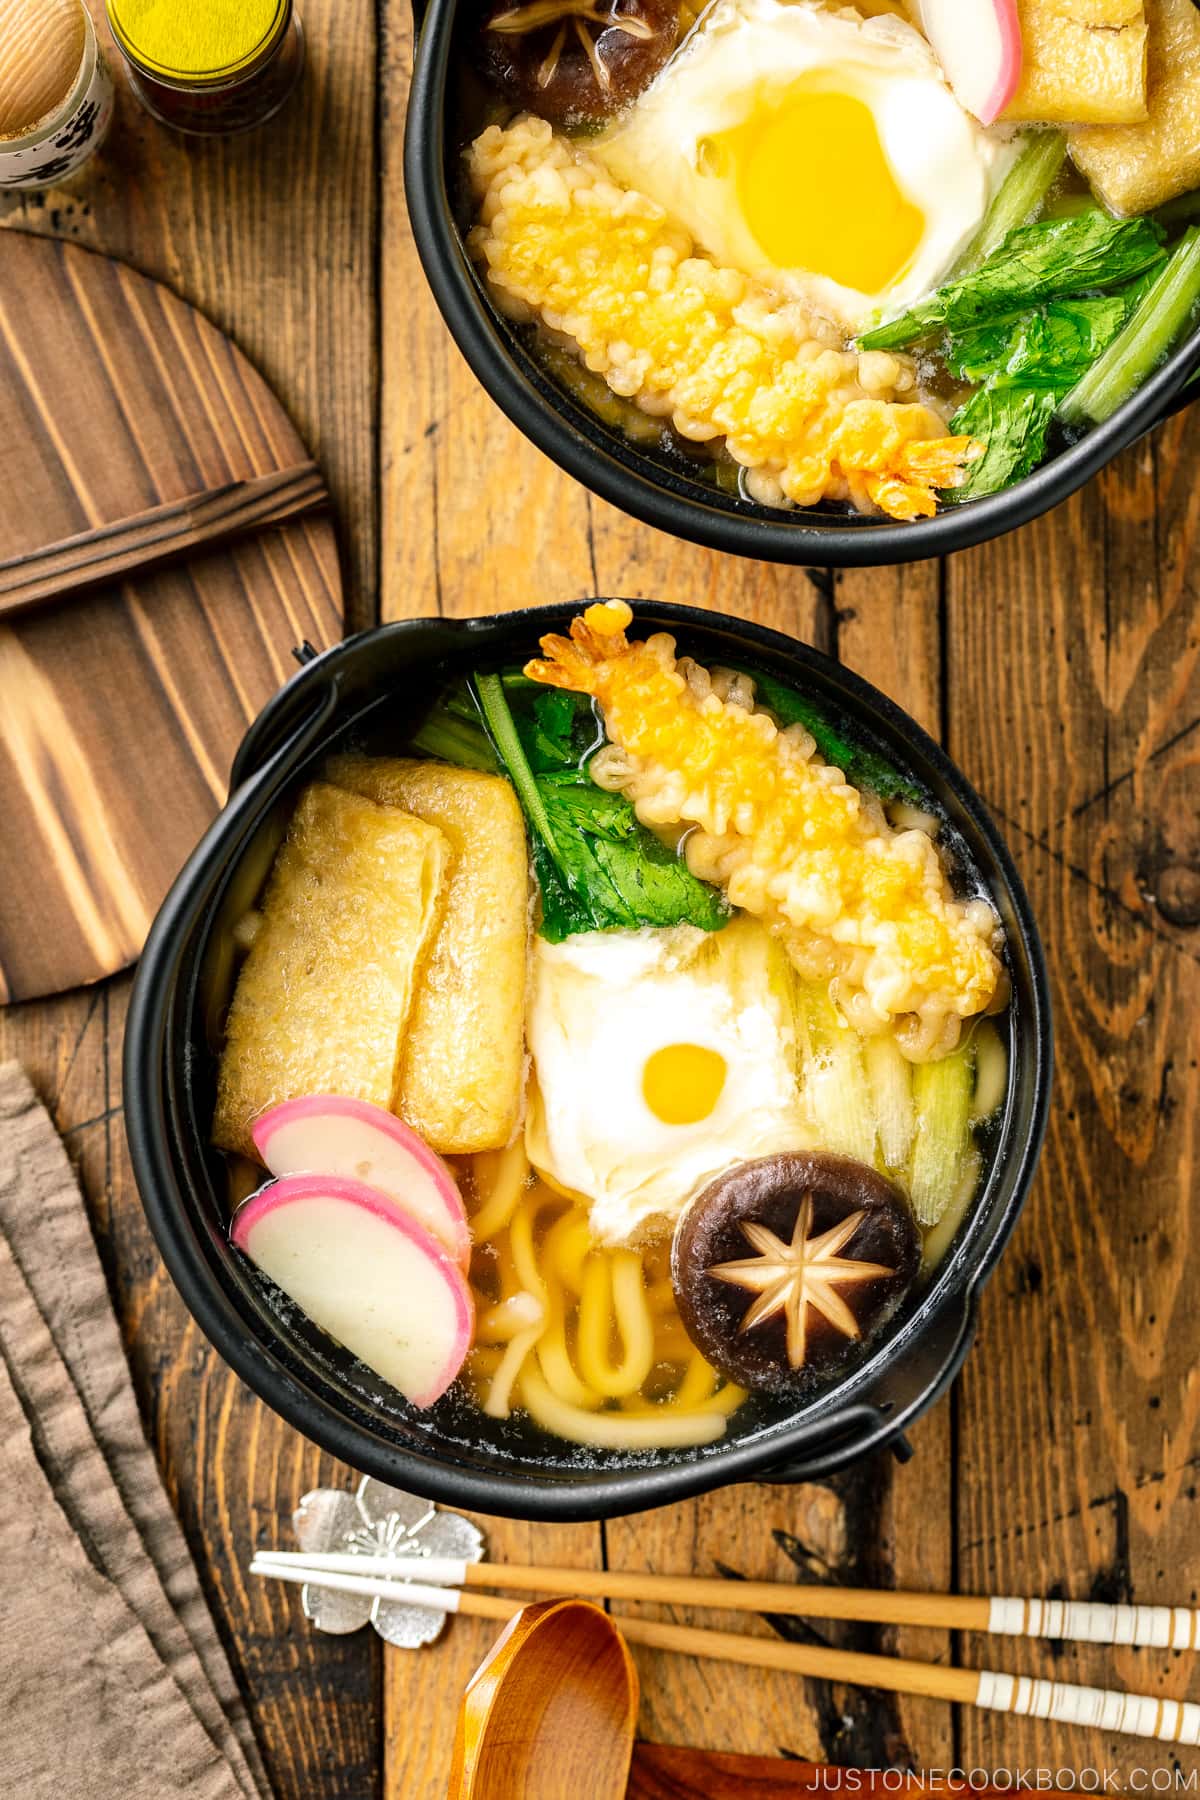 An individual cast iron pot containing Nabeyaki Udon, which is made of udon noodles, kamaboko fish cake, fried tofu, egg cooked in a dashi broth and topped with shrimp tempura.